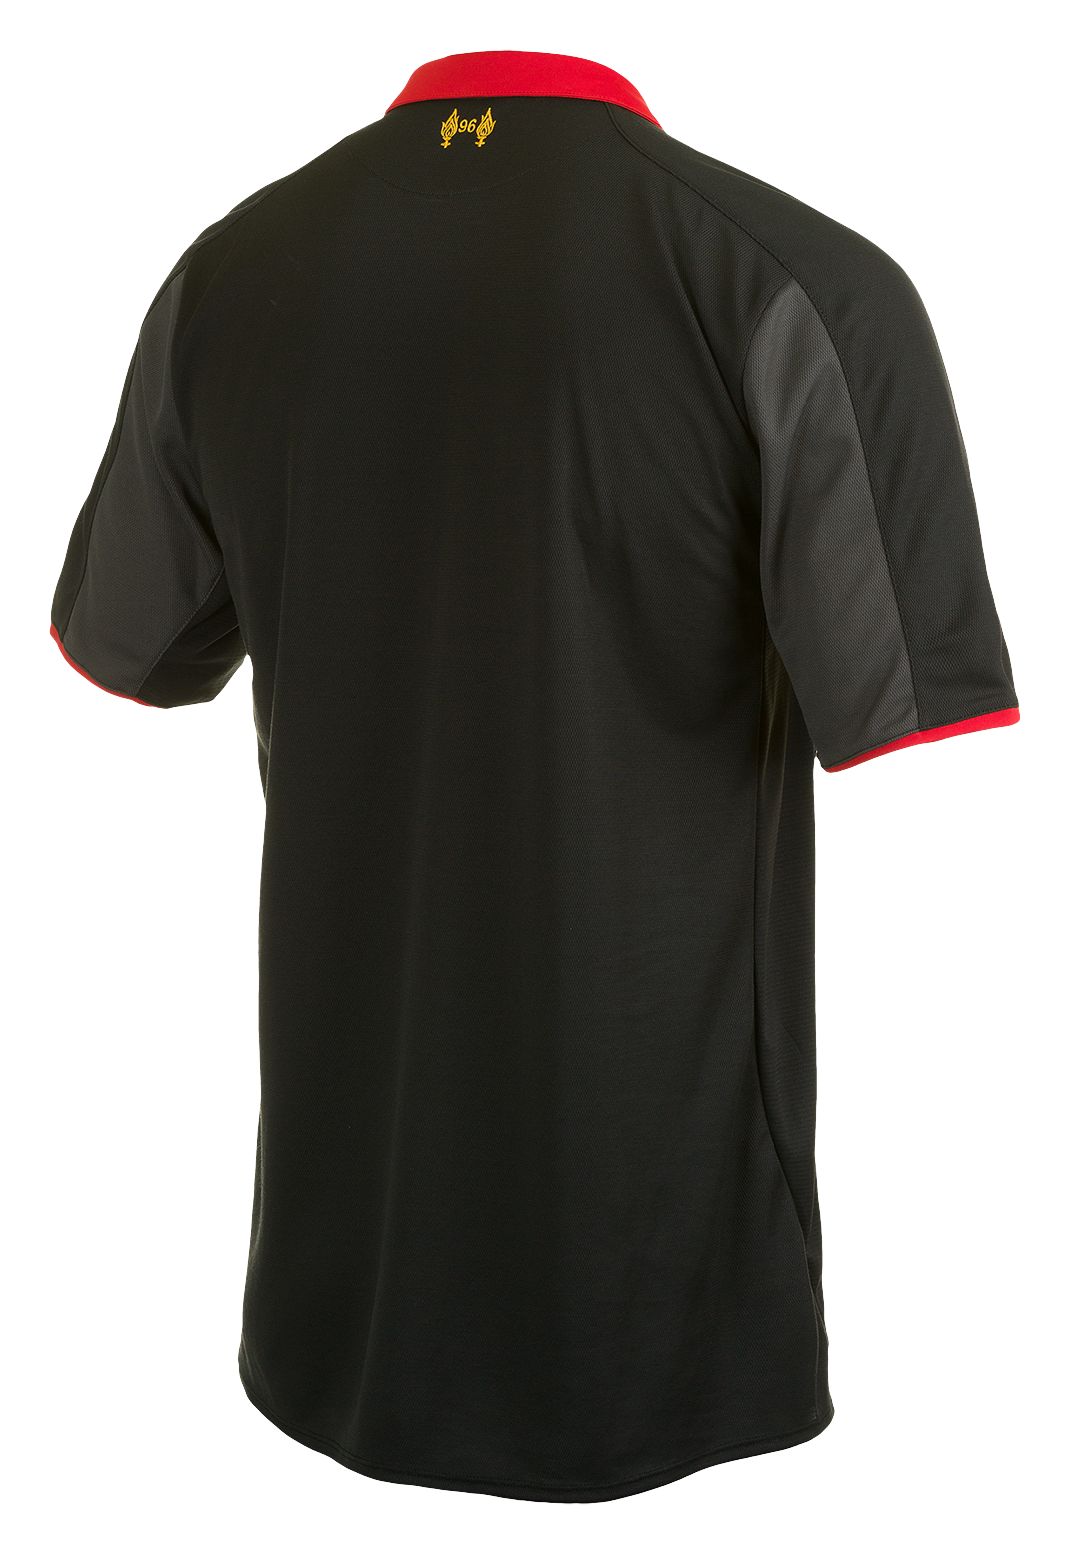 LFC 3rd Short Sleeve Jersey 2014/15, Black with High Risk Red image number 0